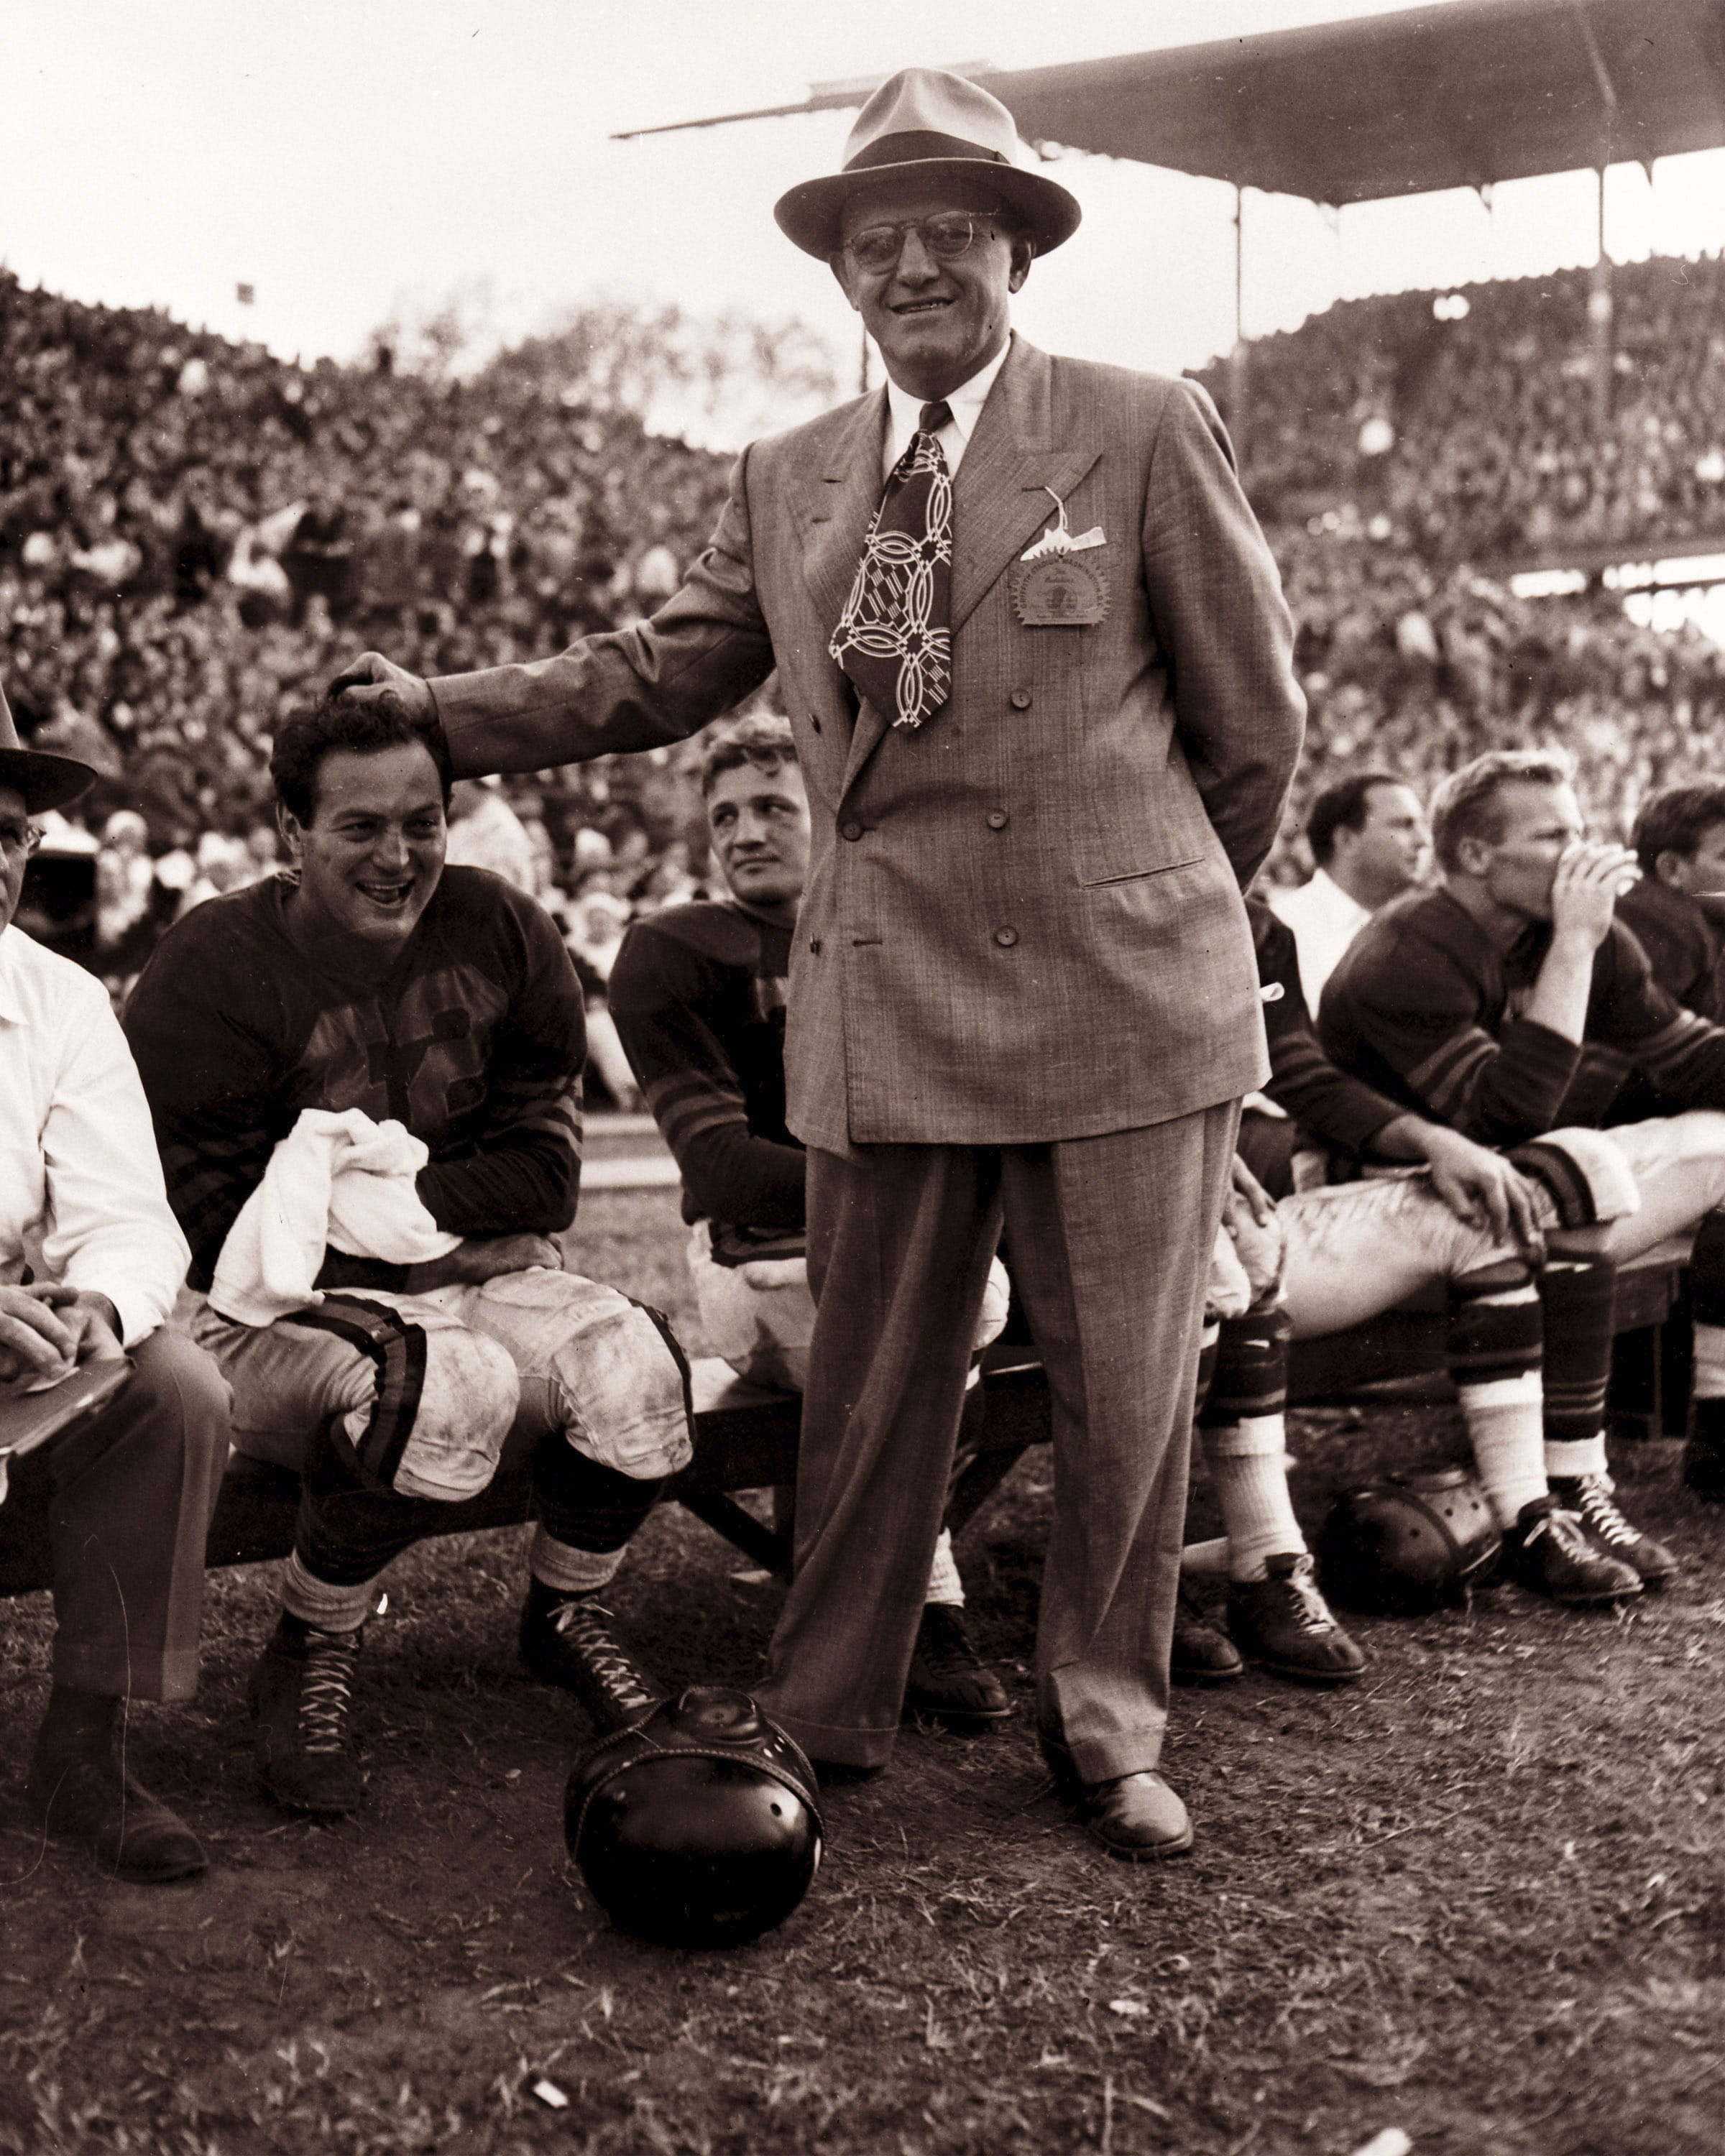 George Halas during the Chicago Bears' victory in the 1940 NFL title game.